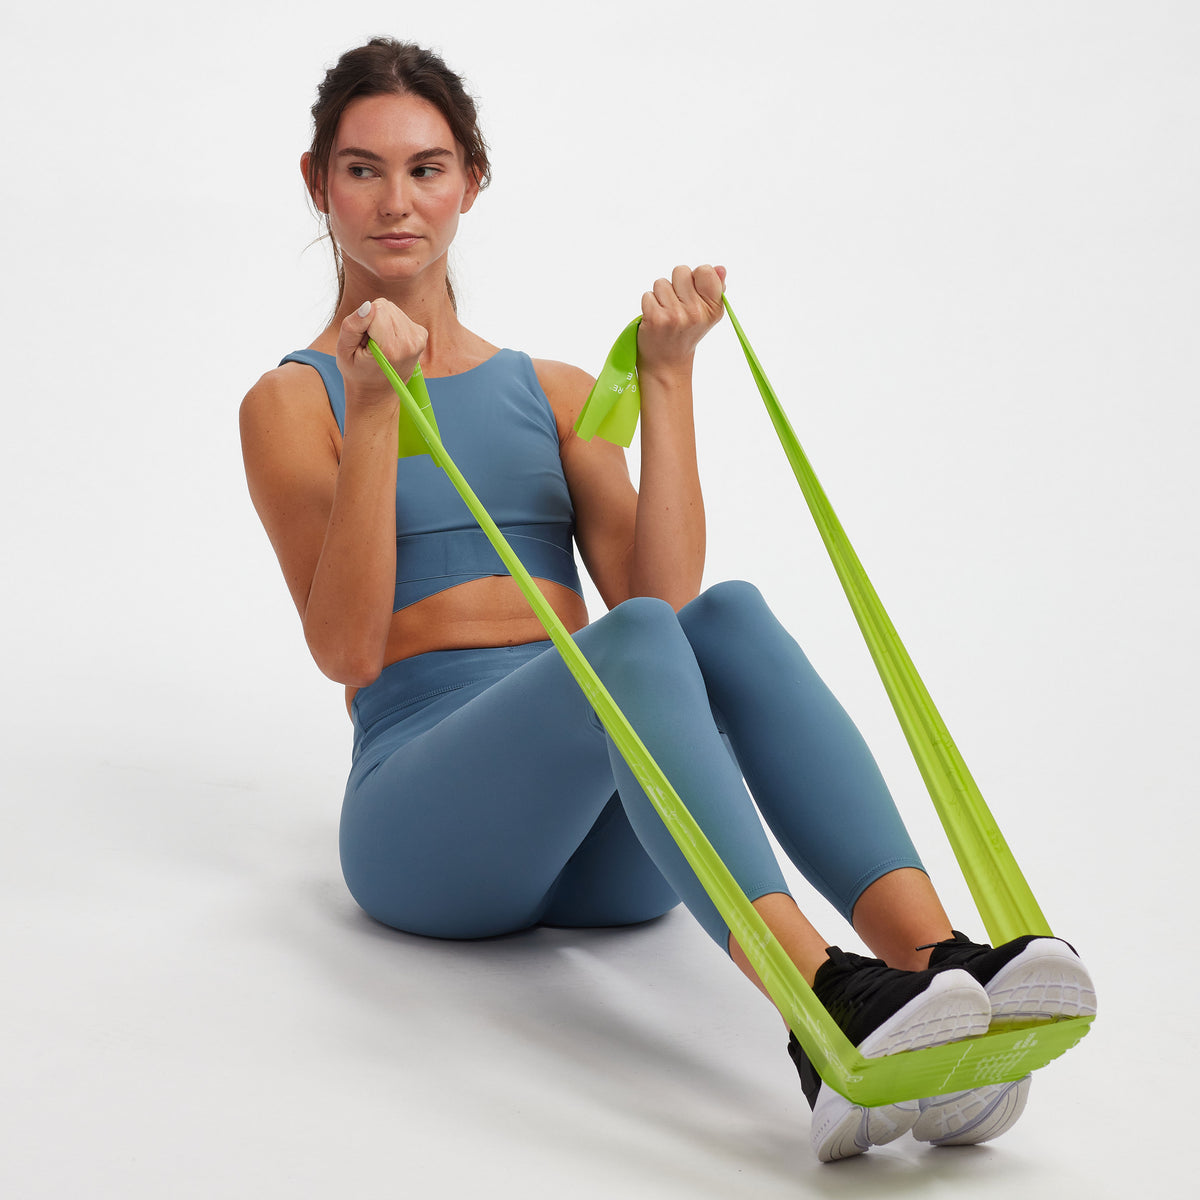 Person seated on the floor - band from the Restore Strength & Flexibility Kit wrapped around the feet  while being held in each hand pulling towards the torso.